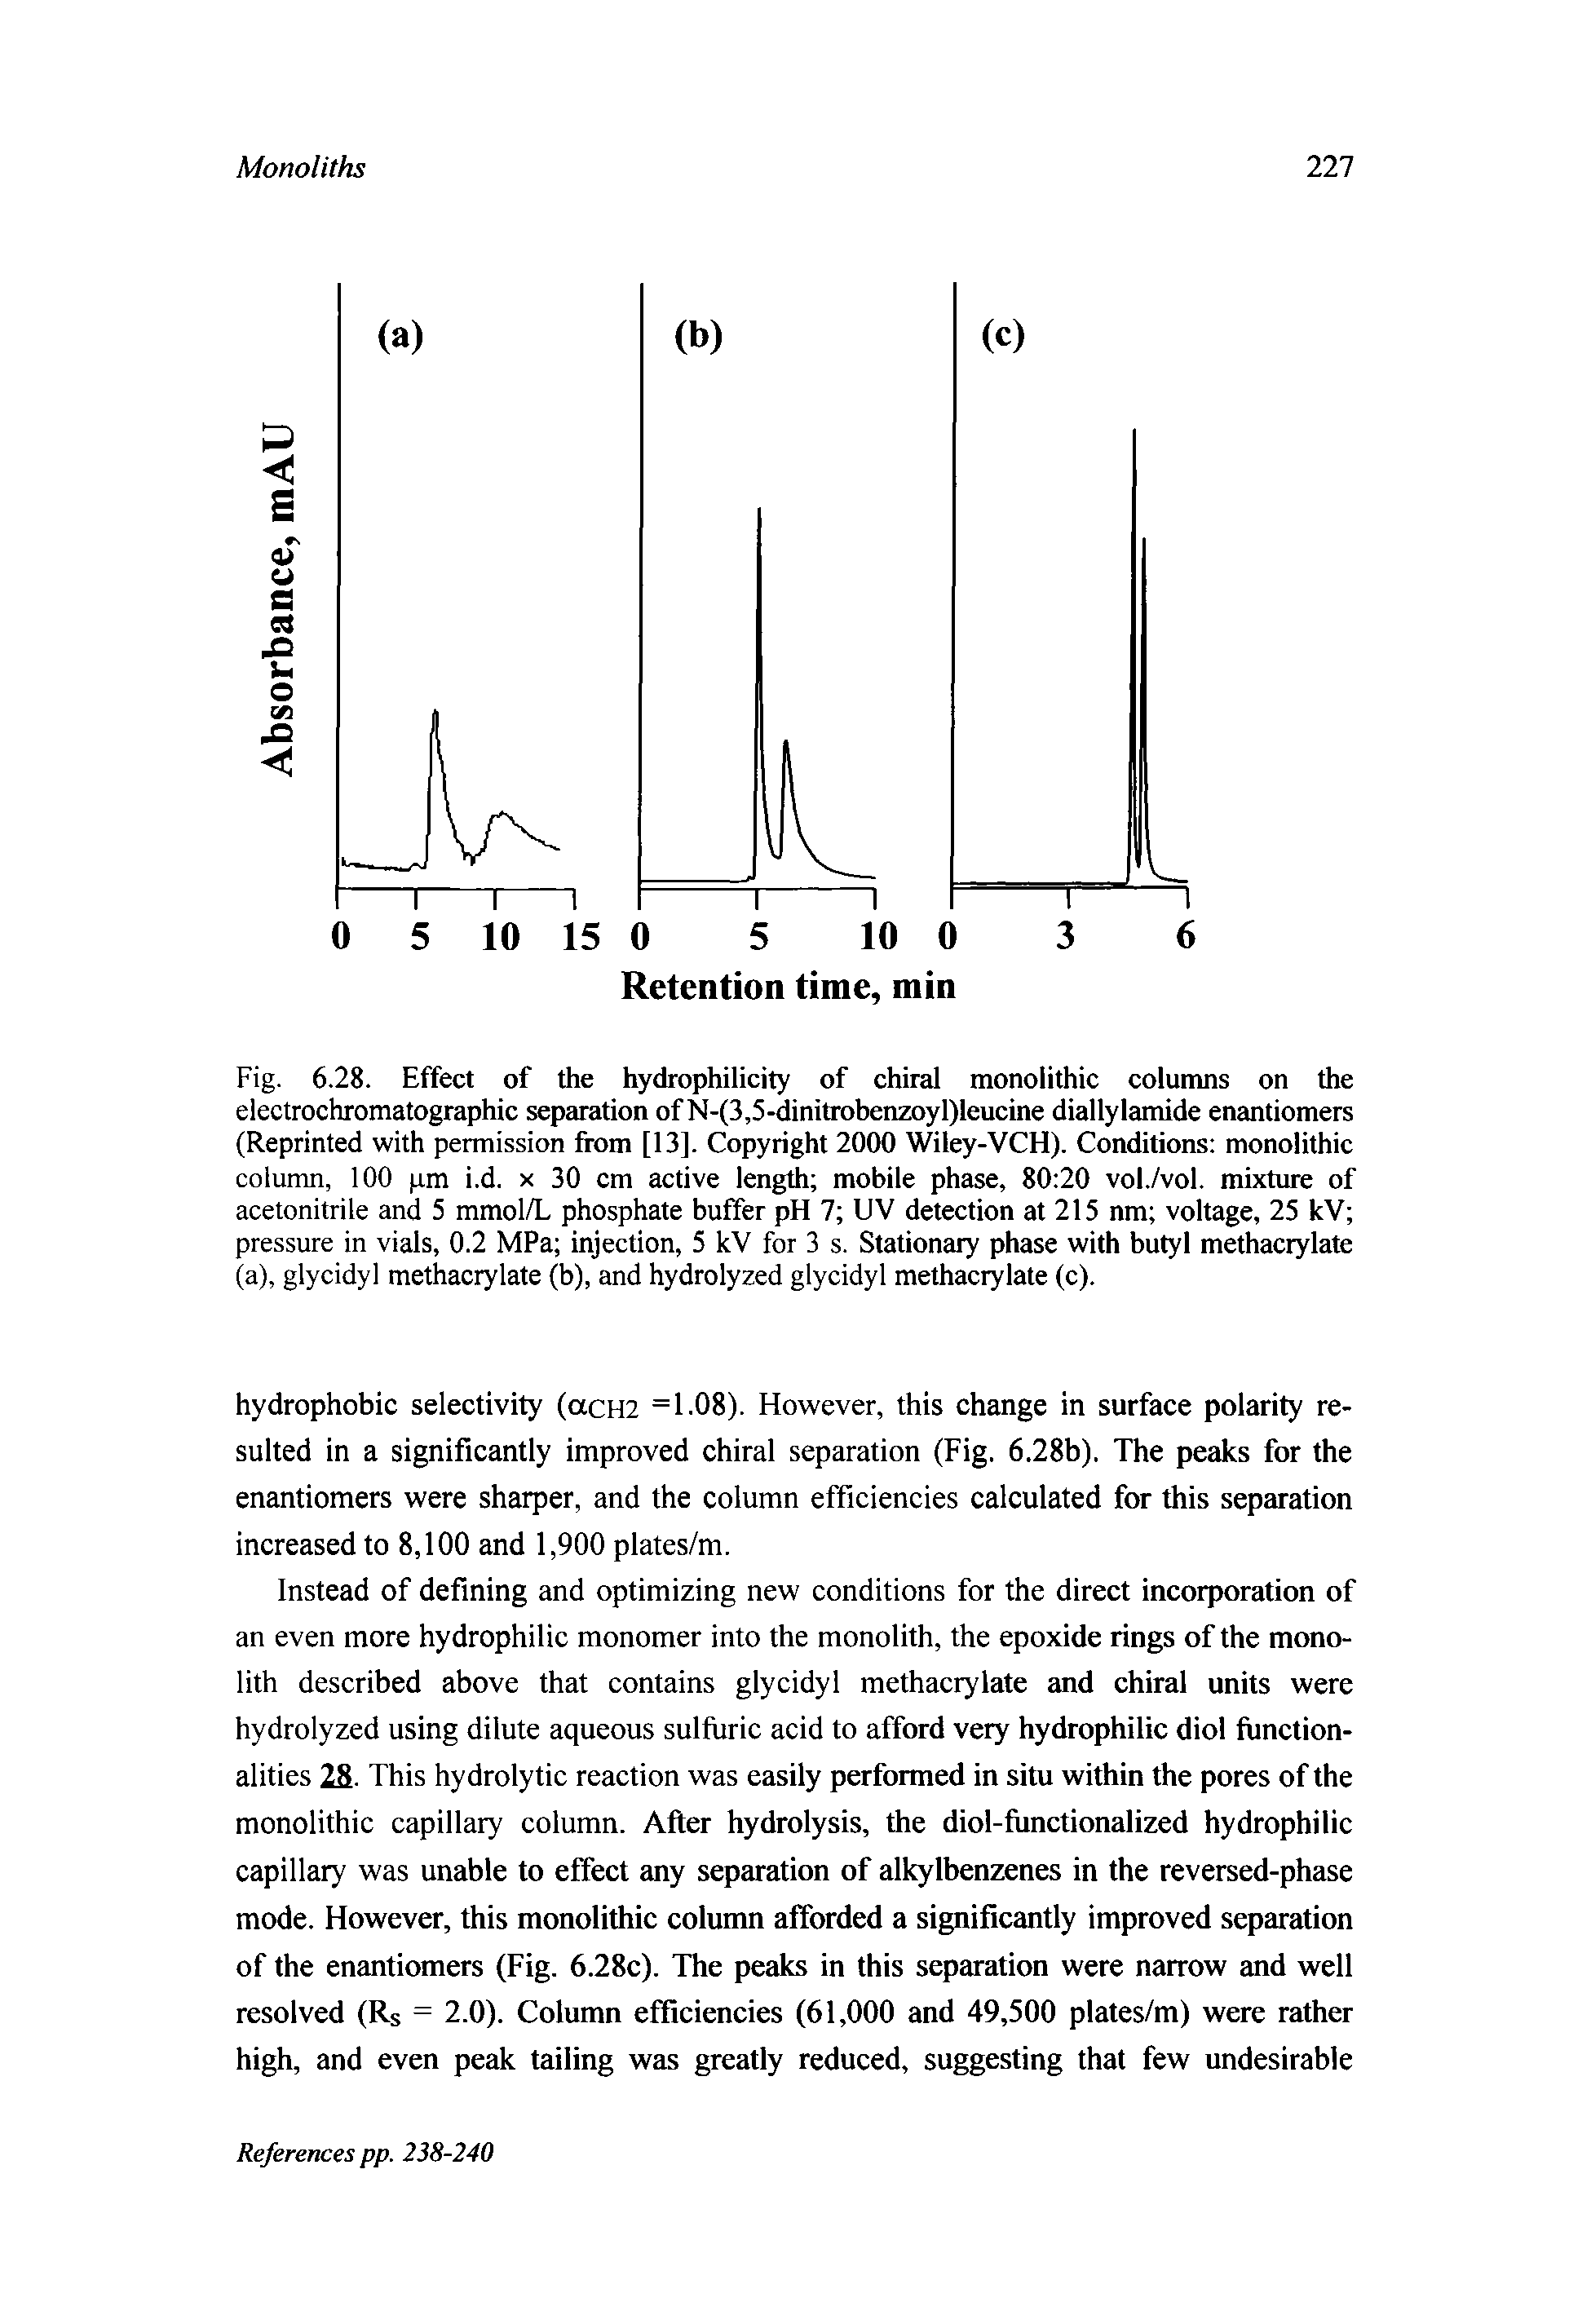 Fig. 6.28. Effect of the hydrophilicity of chiral monolithic columns on the electrochromatographic separation of N-(3,5-dinitrobenzoyl)leucine diallylamide enantiomers (Reprinted with permission from [13]. Copyright 2000 Wiley-VCH). Conditions monolithic column, 100 pm i.d. x 30 cm active length mobile phase, 80 20 vol./vol. mixture of acetonitrile and 5 mmol/L phosphate buffer pH 7 UV detection at 215 nm voltage, 25 kV pressure in vials, 0.2 MPa injection, 5 kV for 3 s. Stationary phase with butyl methacrylate (a), glycidyl methacrylate (b), and hydrolyzed glycidyl methacrylate (c).